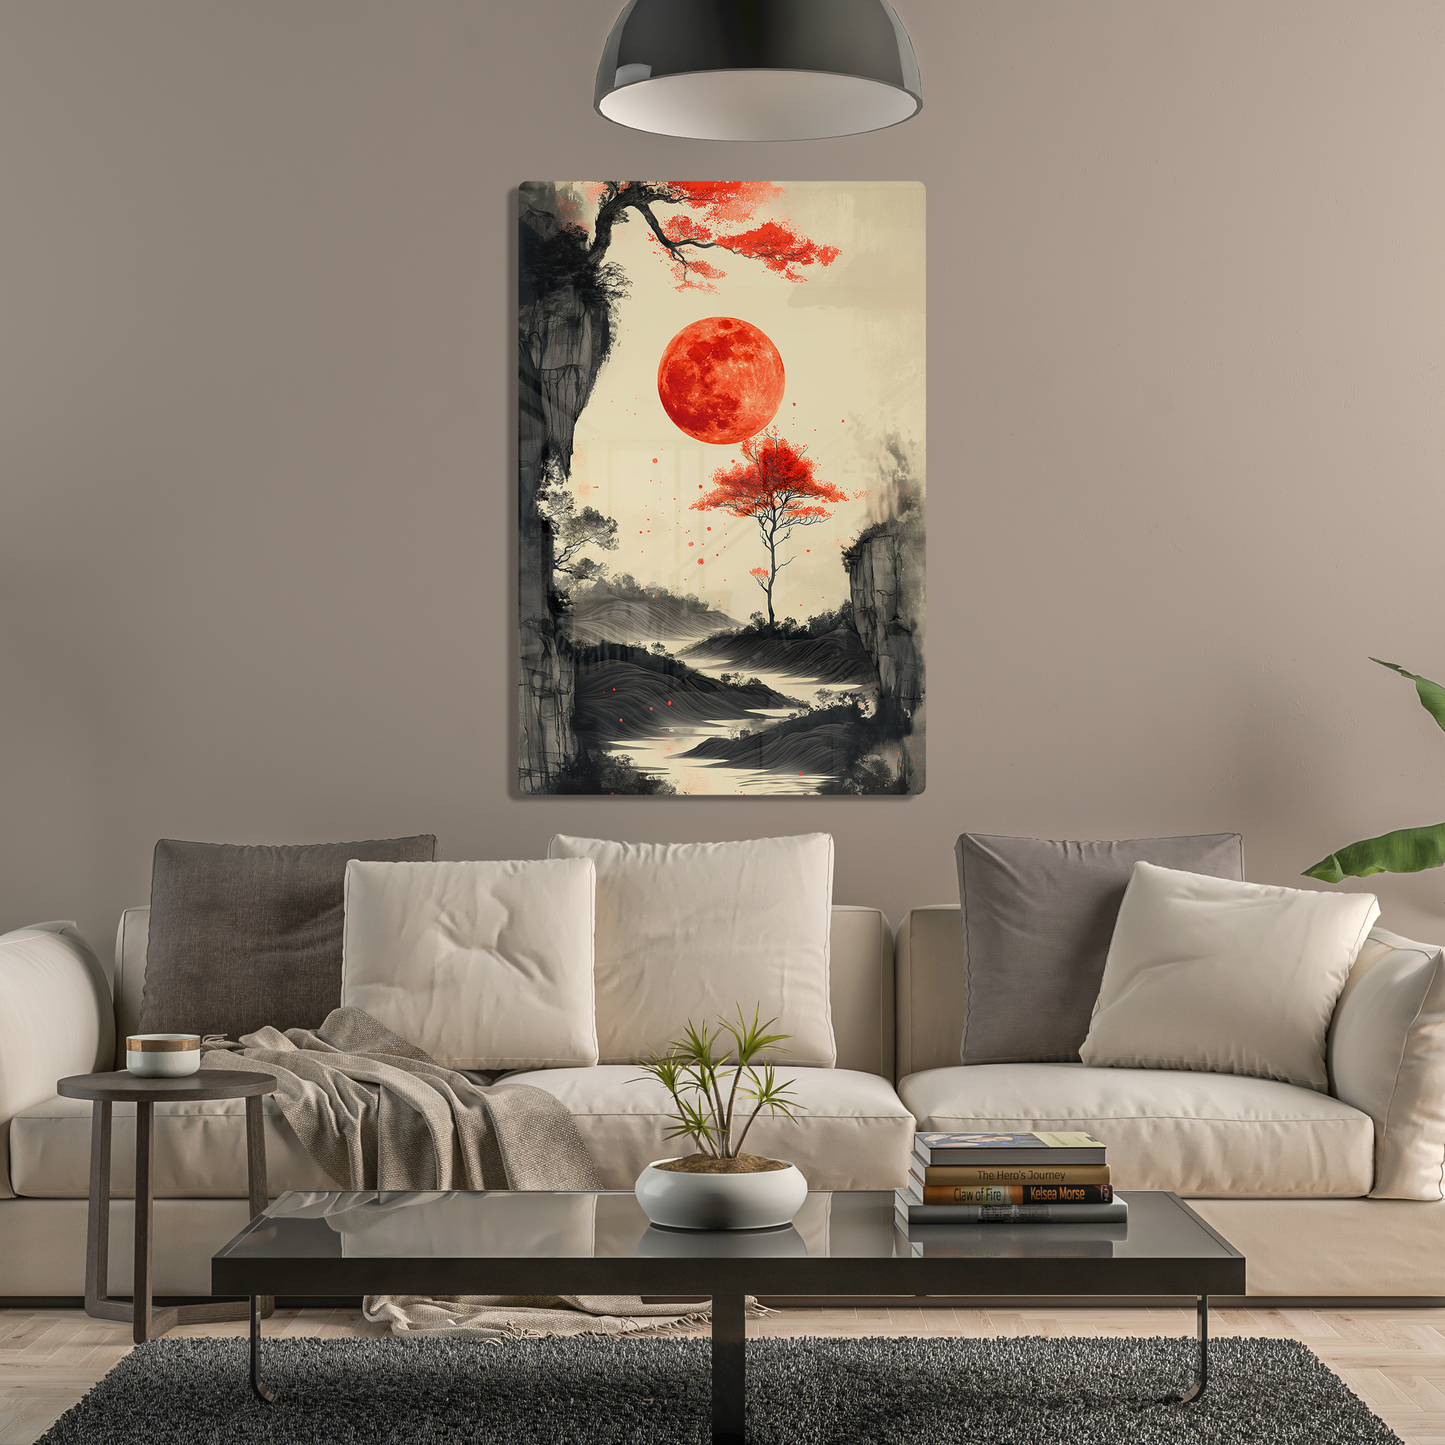 Scarlet Moonrise (Acrylic)Step into the universe with Ethereal landscape with a vivid red moon. Acrylic art from RimaGallery. Experience the cosmos in your home with vibrant, ethically crafteRimaGallery